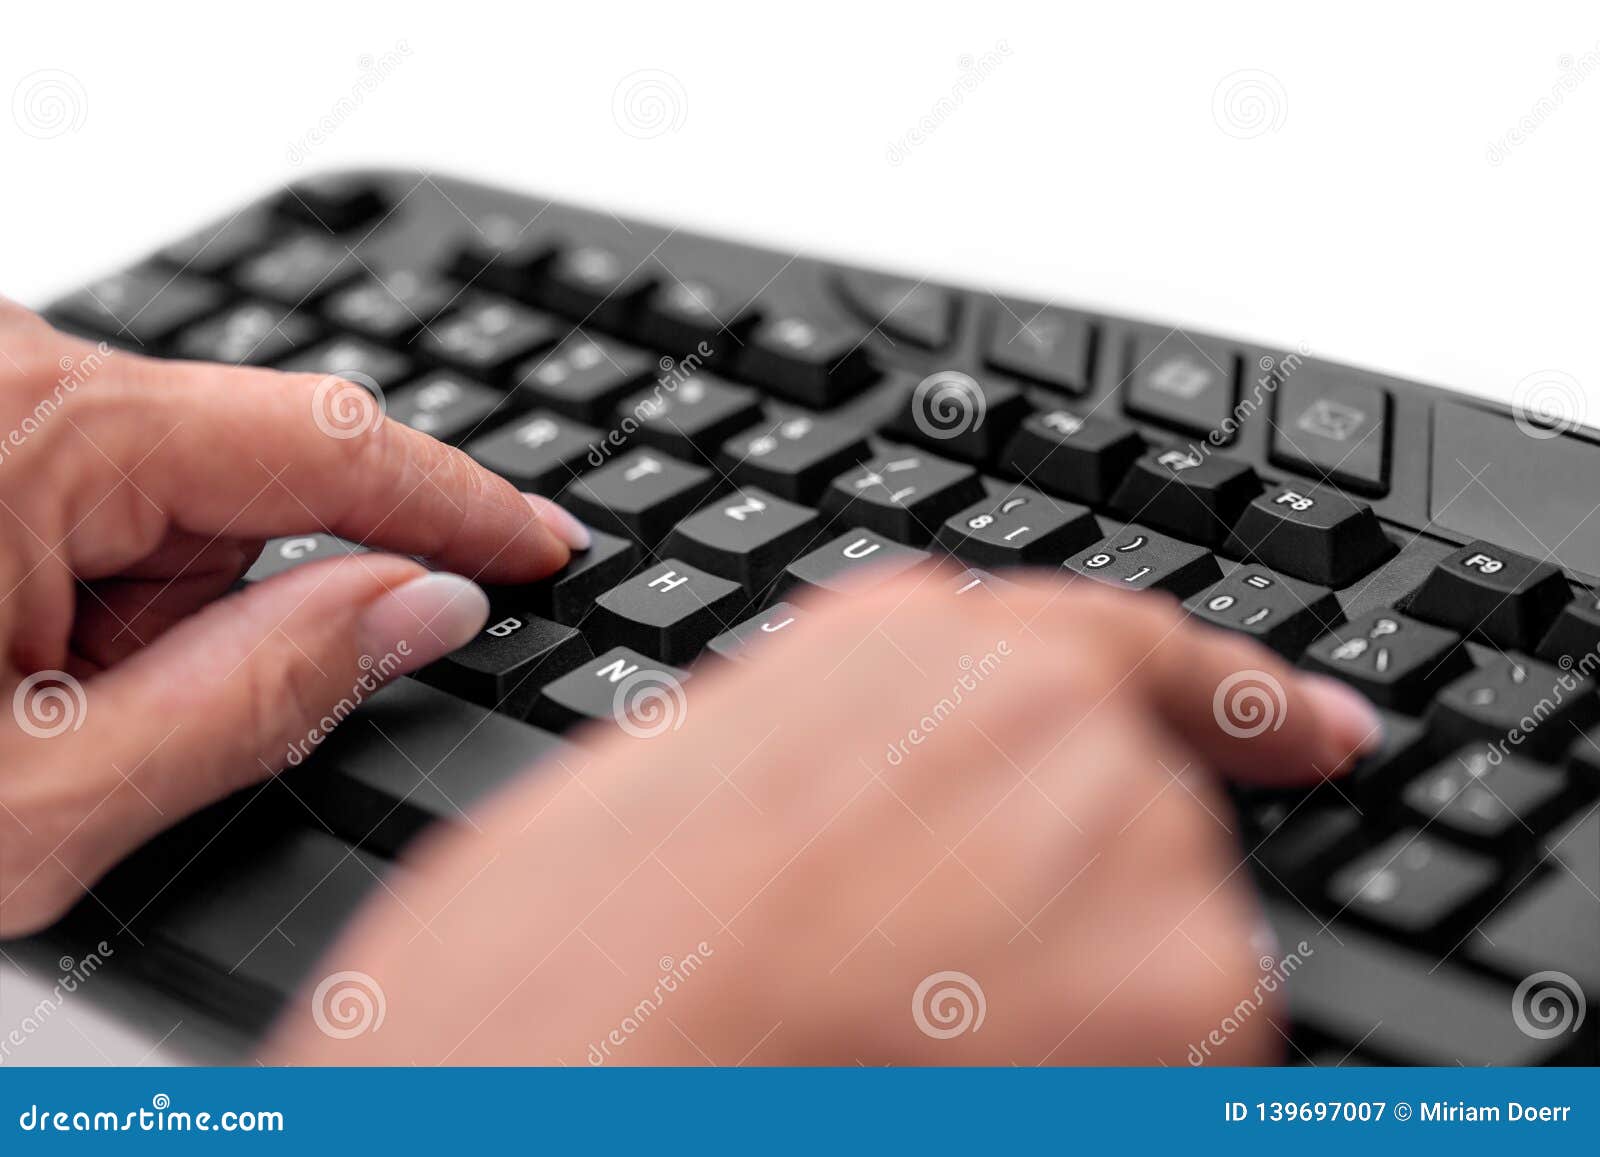 senior woman hands with a hunt and peck or brady typing on the keyboard